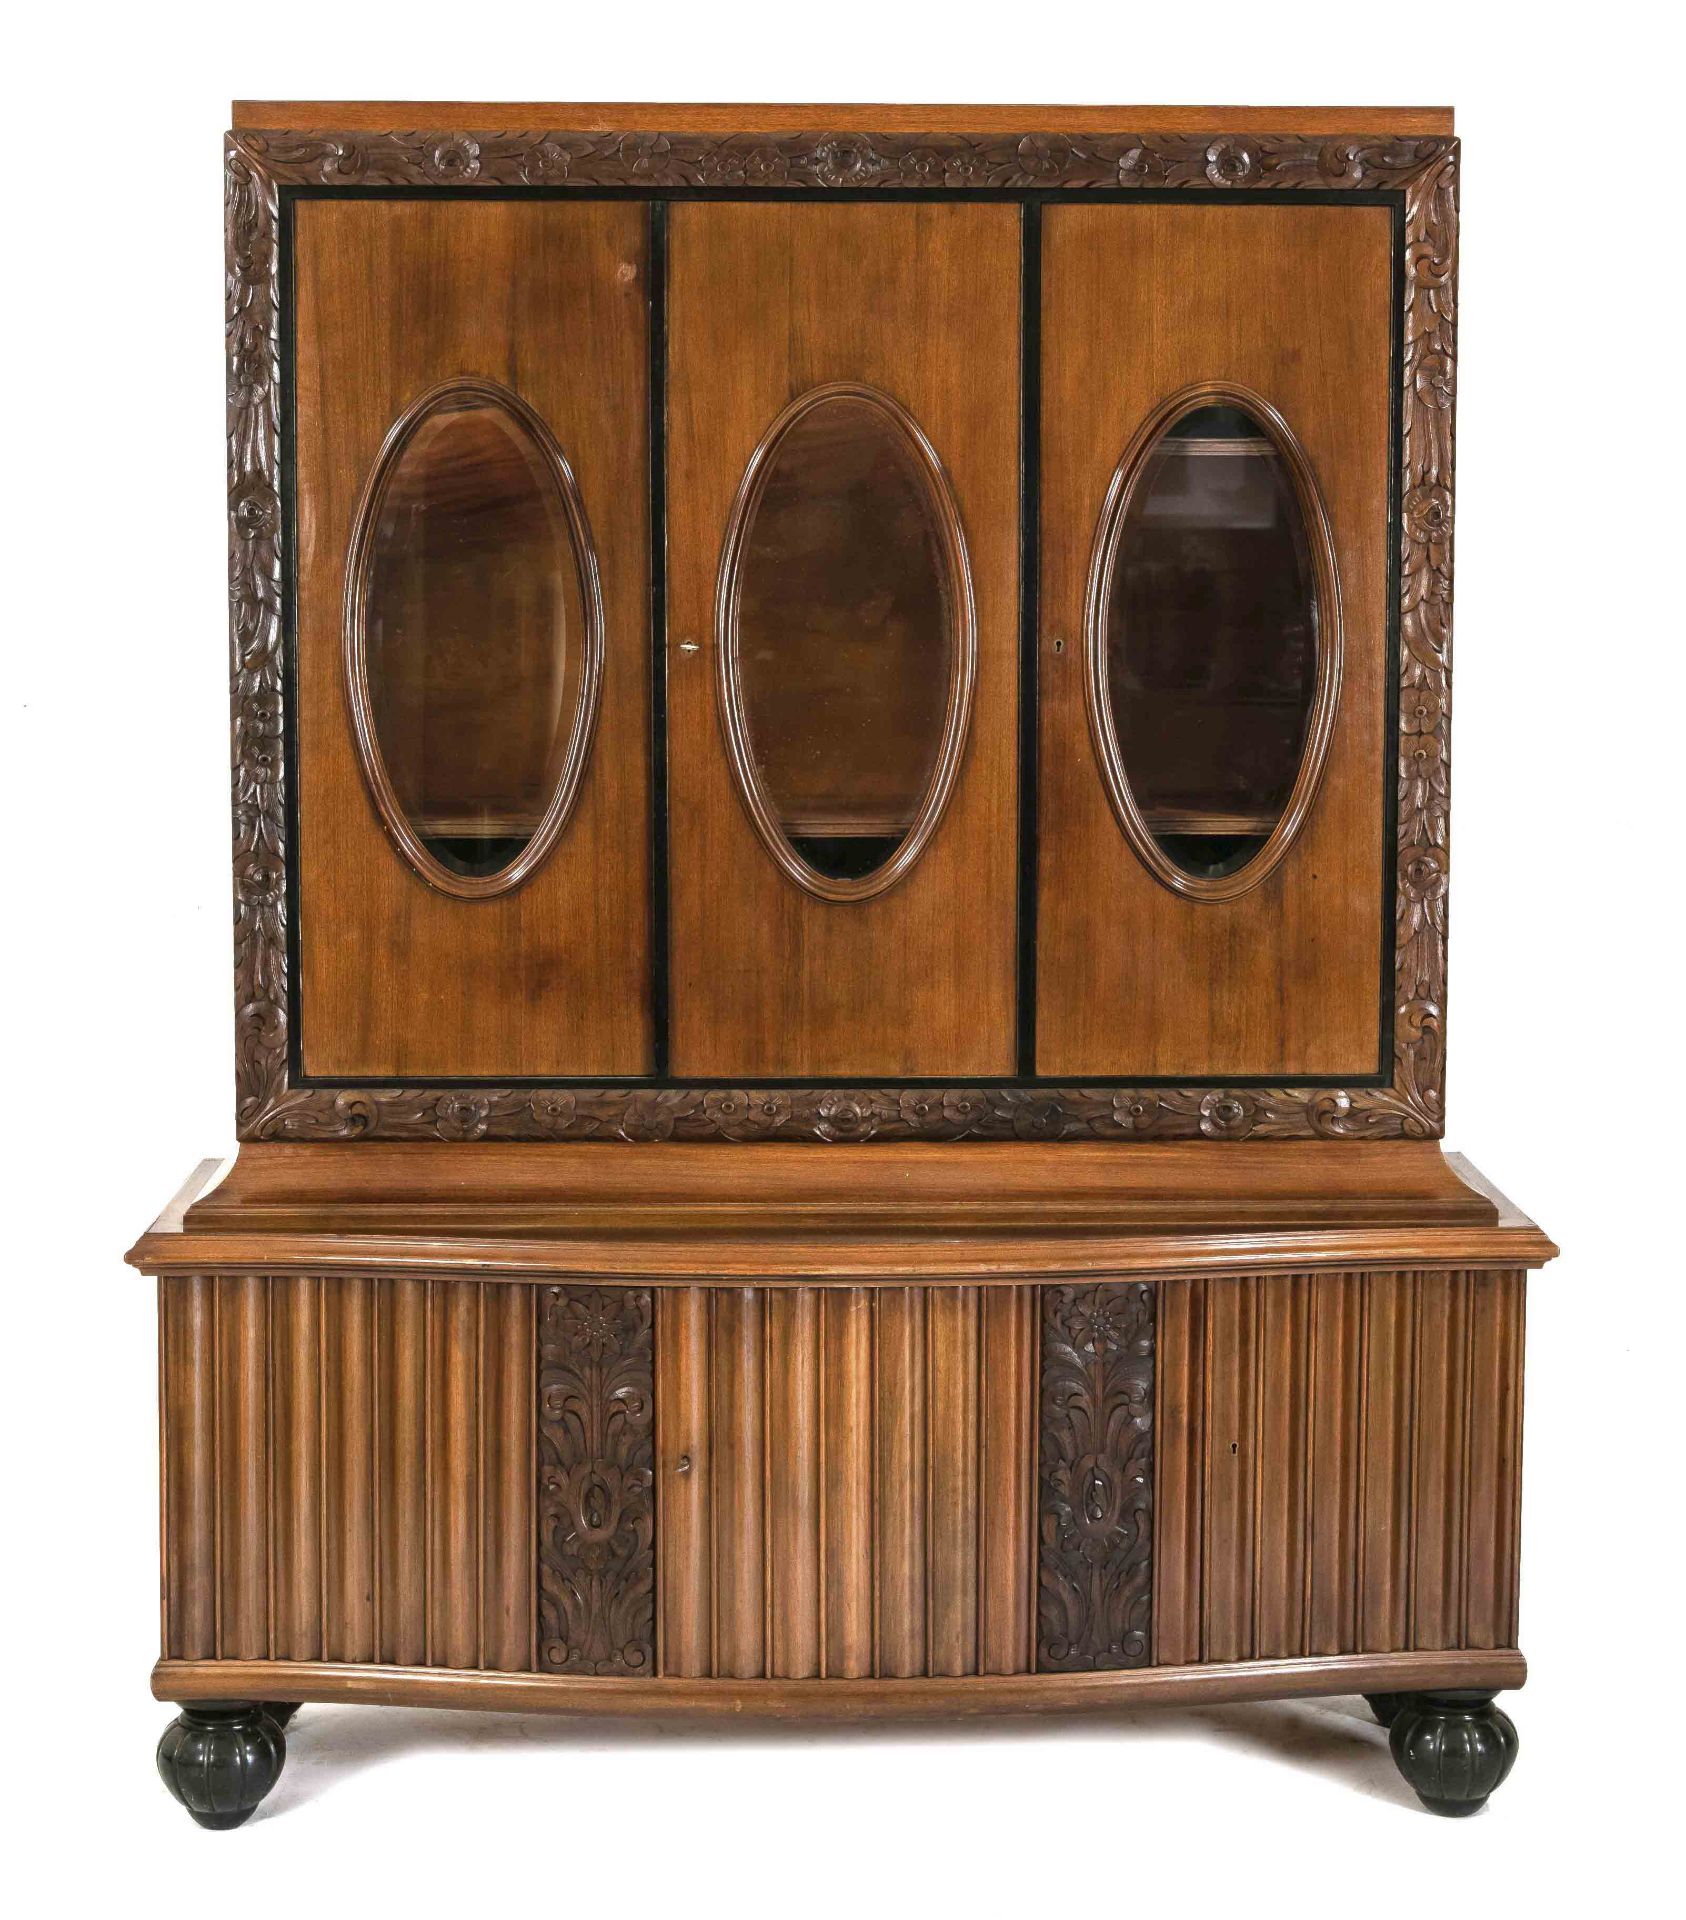 Art deco top buffet around 1920, mahogany, top with 3 oval faceted glass panes, 185 x 151 x 56